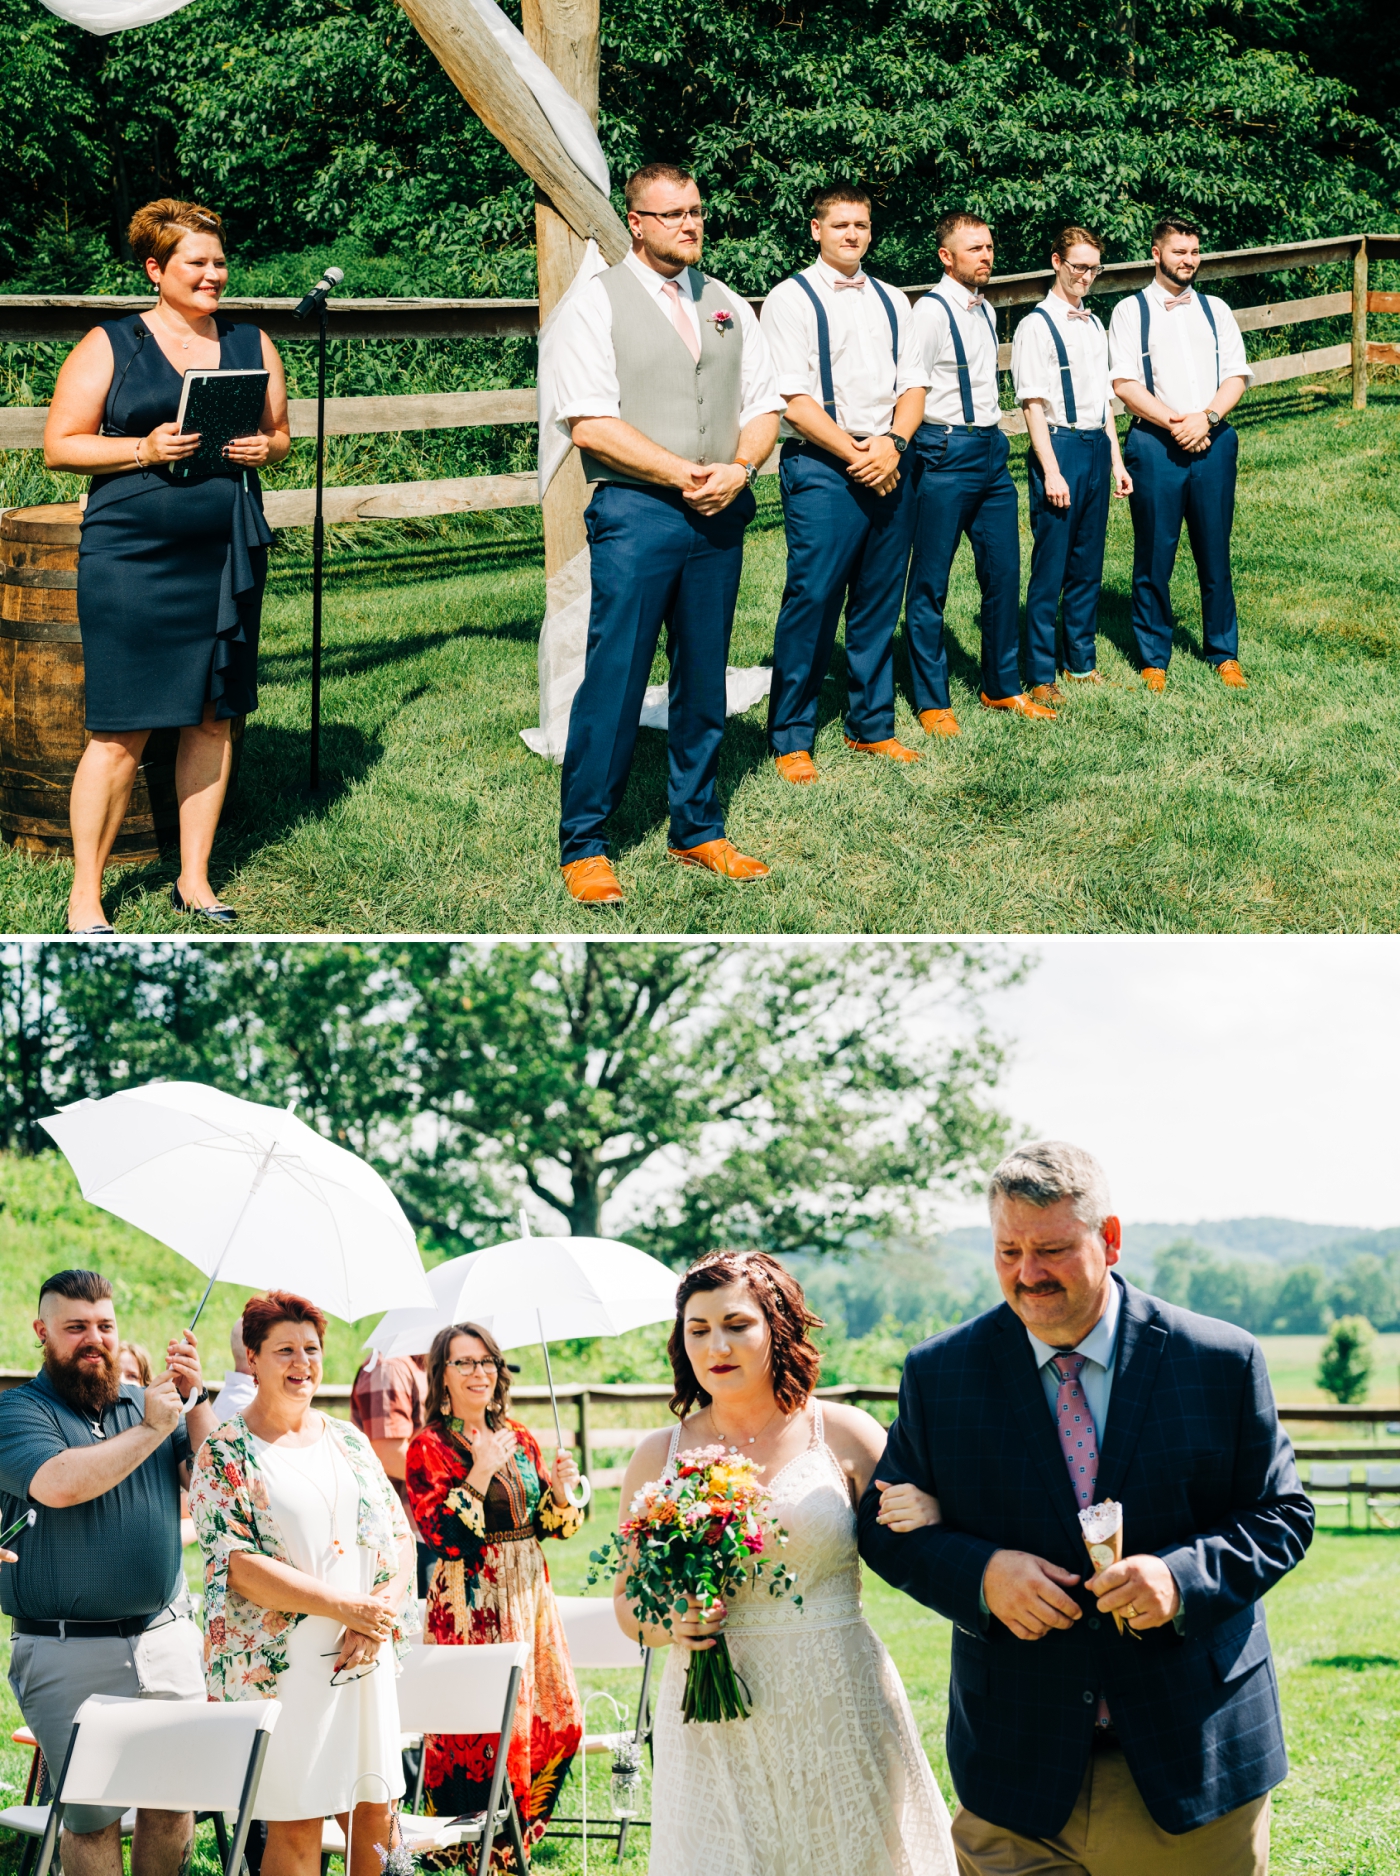 Benefits of a second photographer for your Indiana Wedding